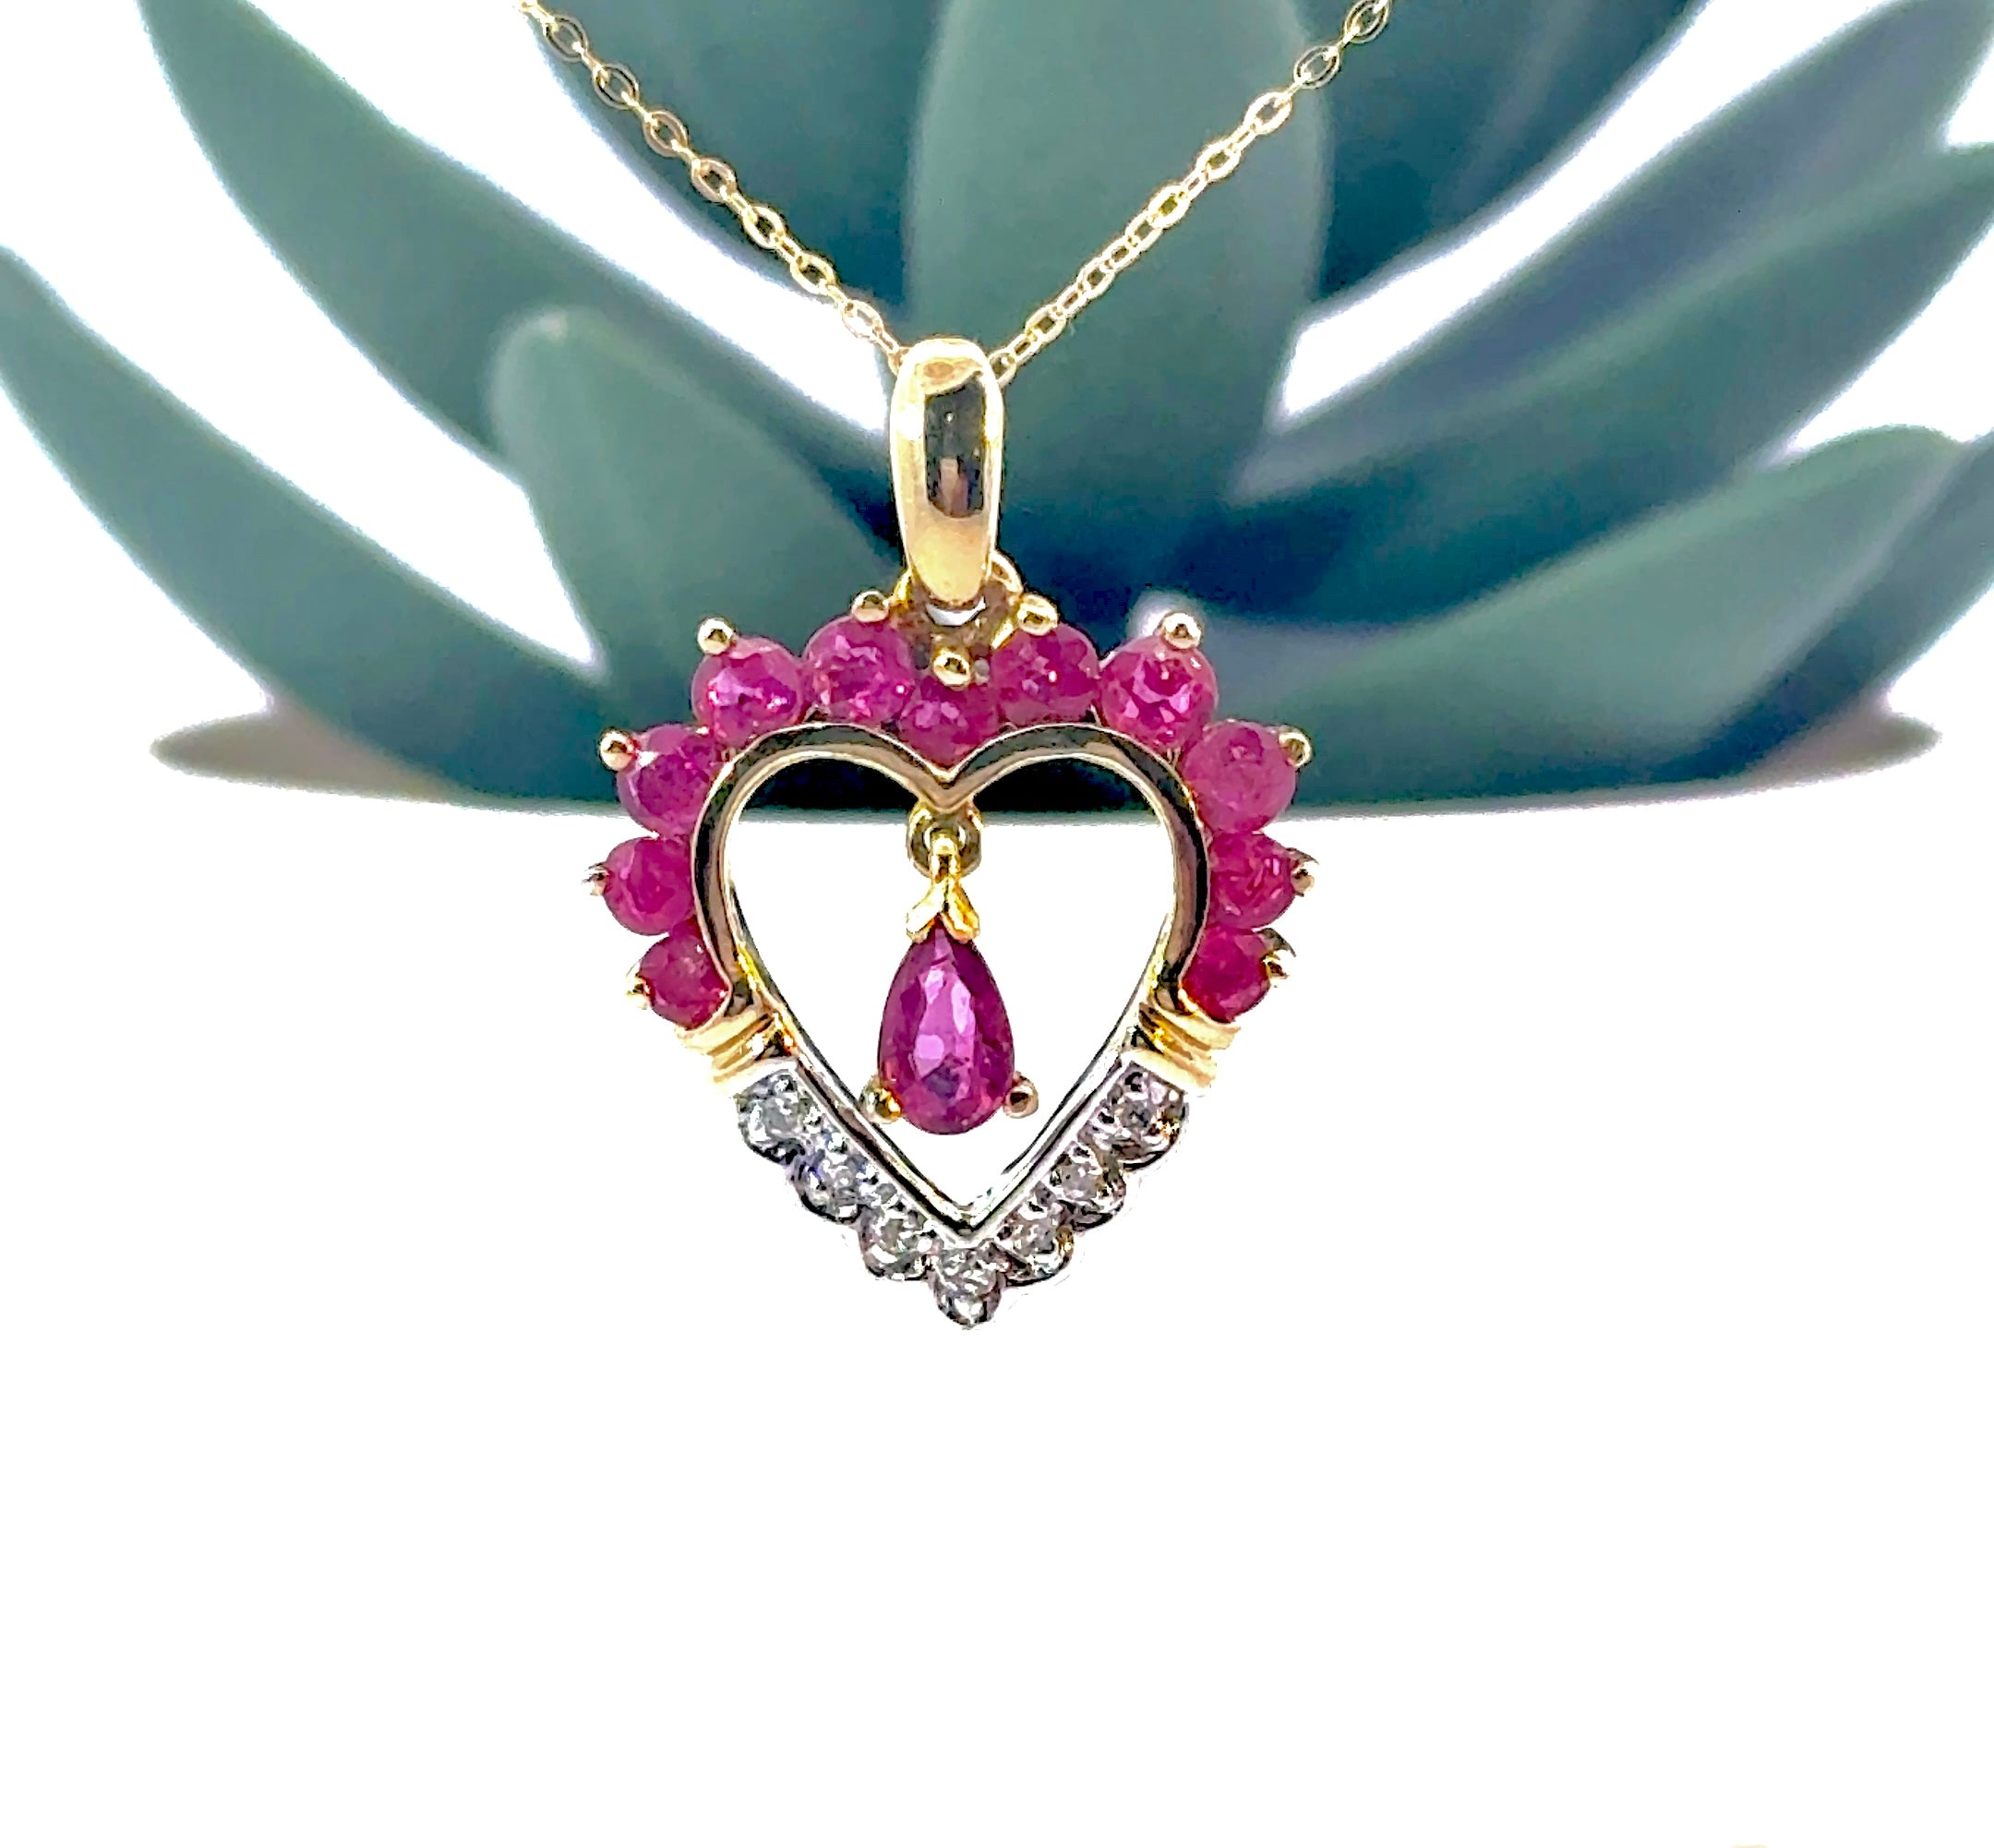 Vintage Pear Cut Ruby and Diamond Heart Necklace in 14K Gold